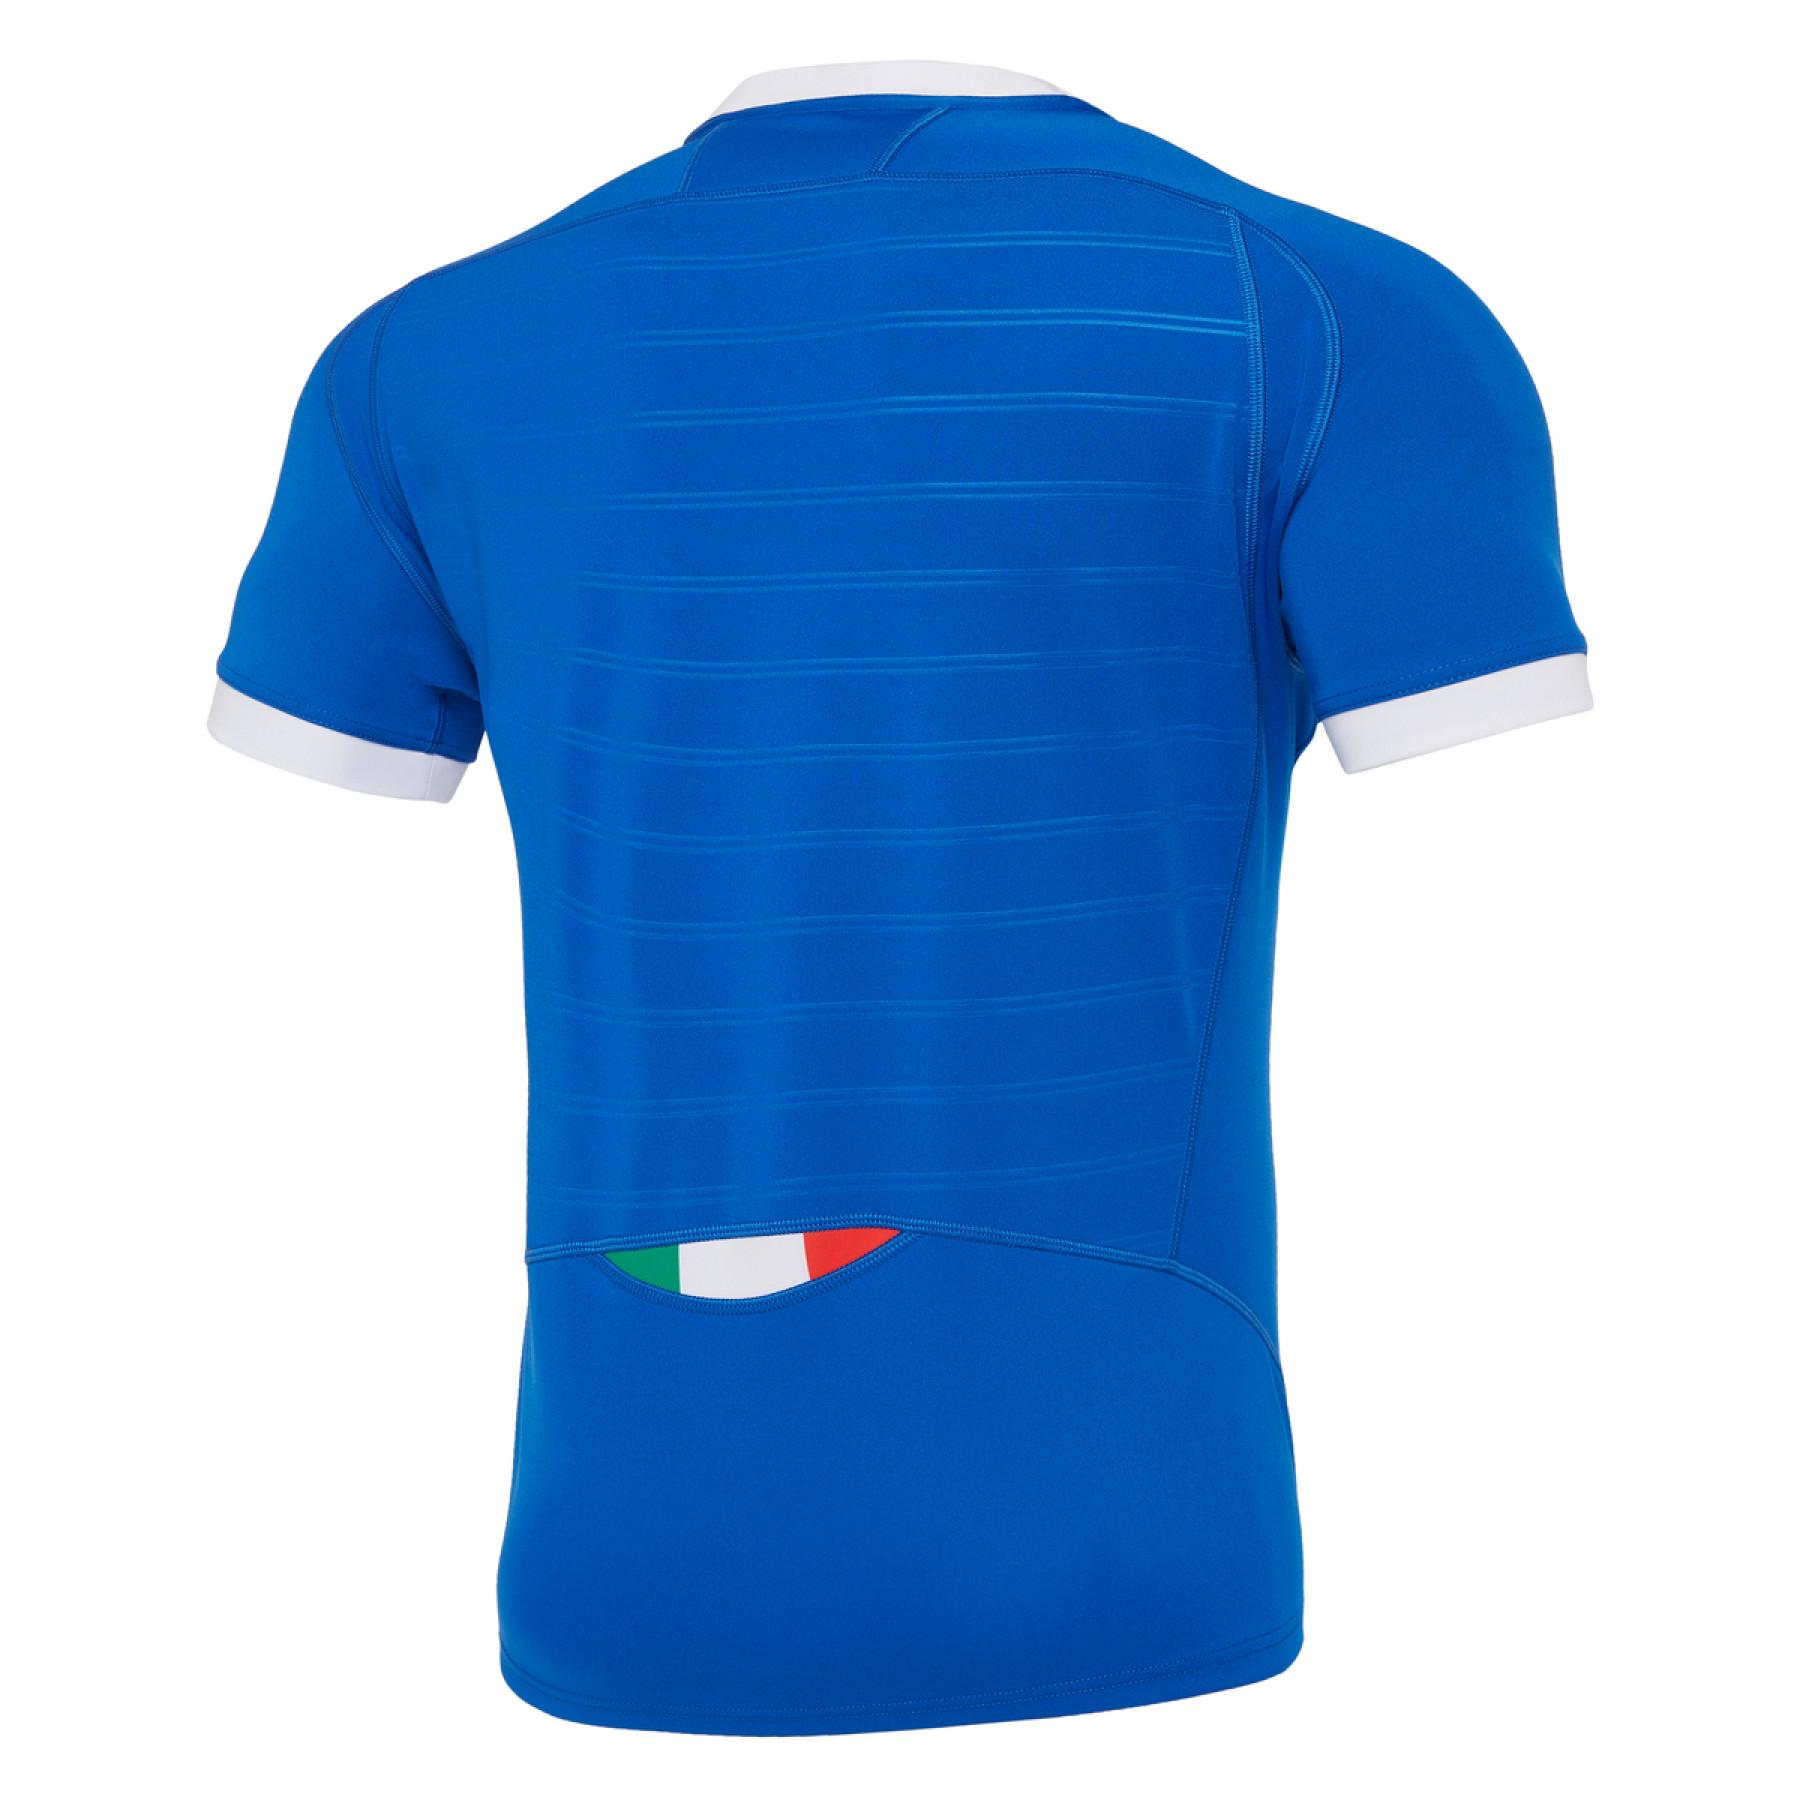 Home jersey Italie rugby 2020/21